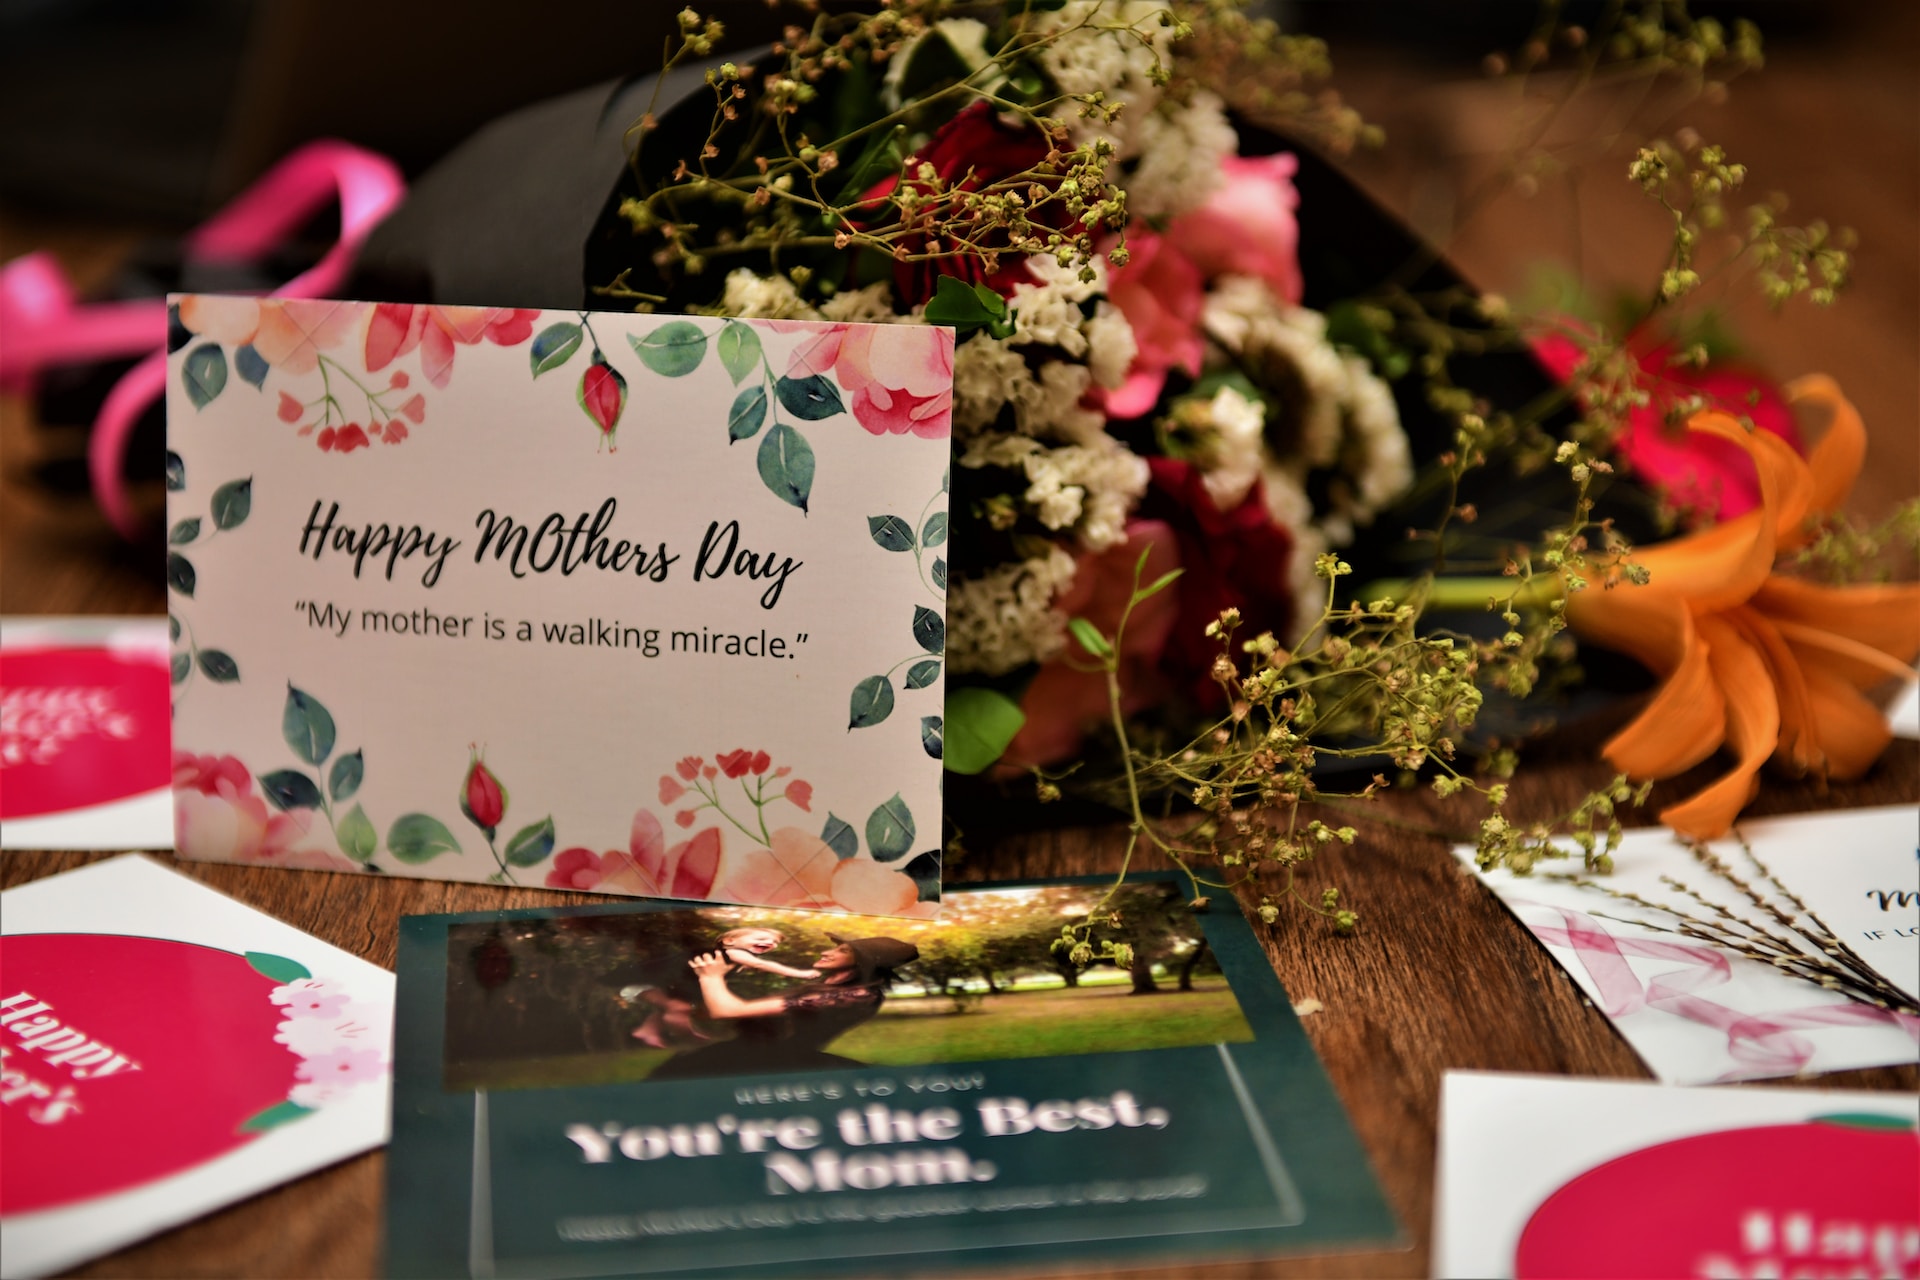 Mothers Day cards and flowers on table